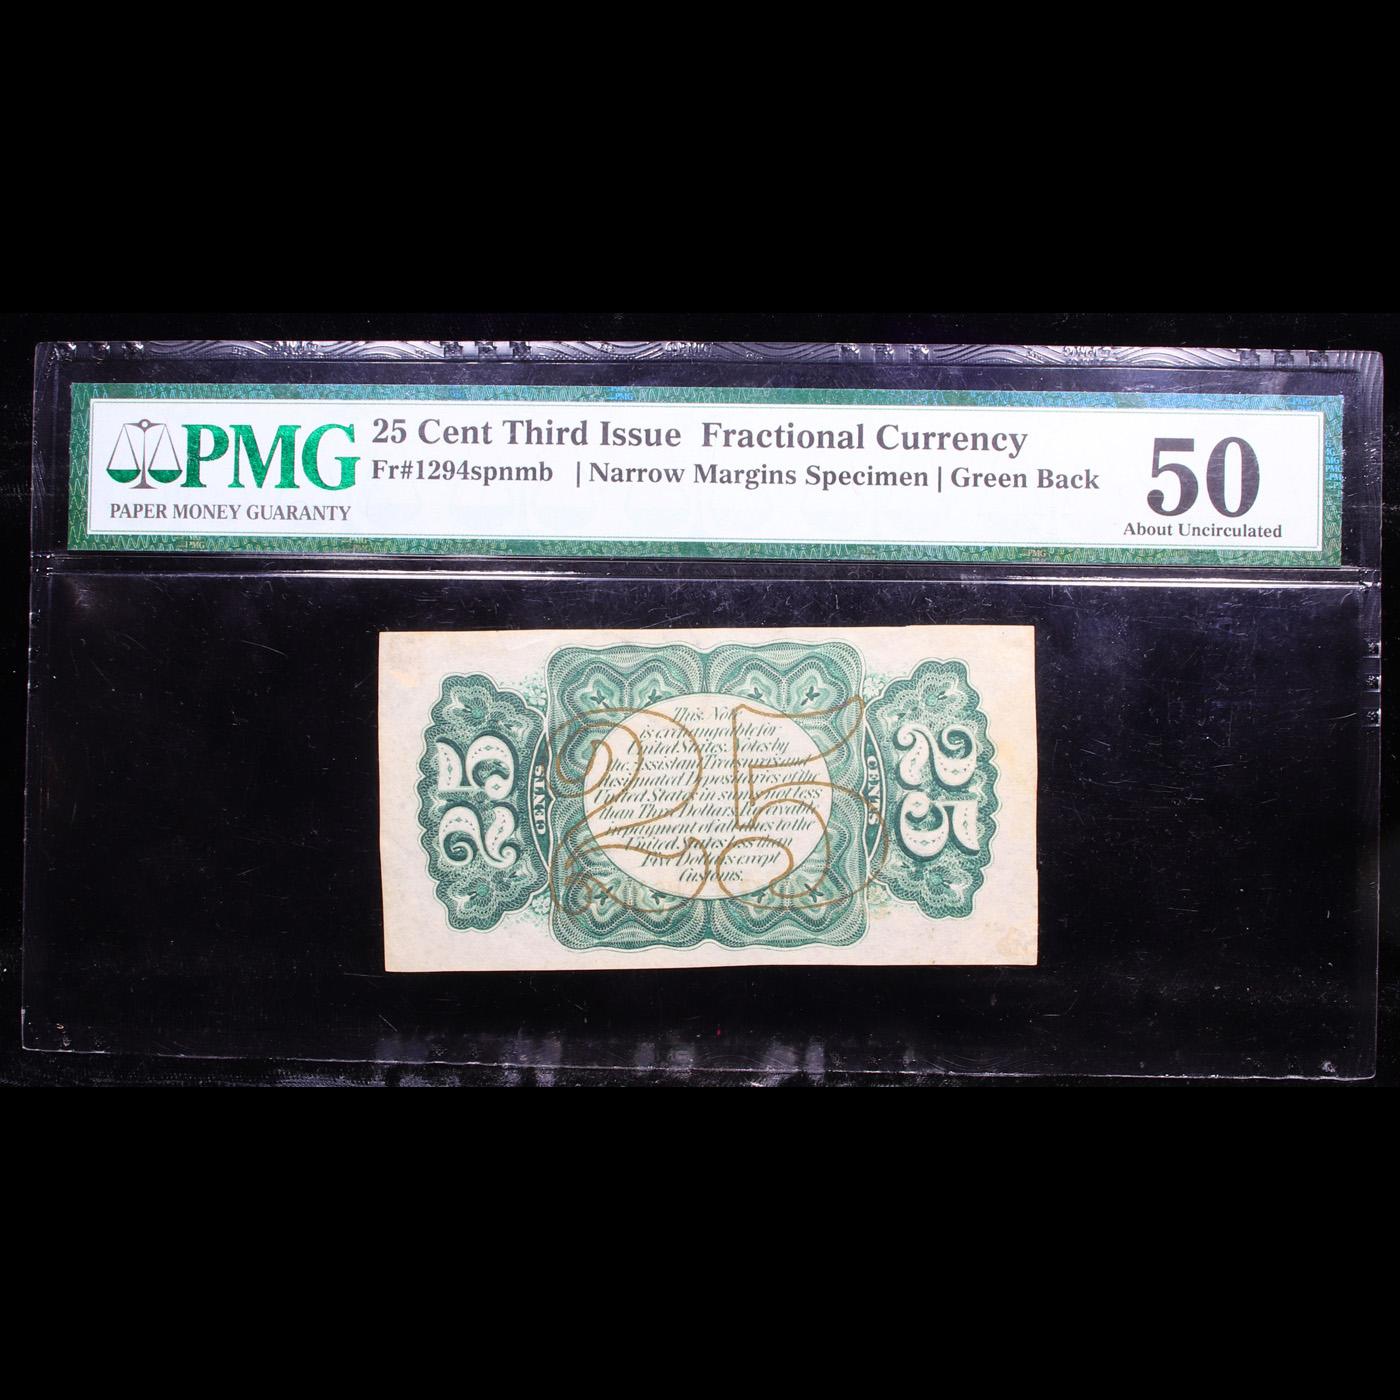 Third Issue 25c Fractional Currency FR-1294 SPNMB Green Back Graded au50 By PMG